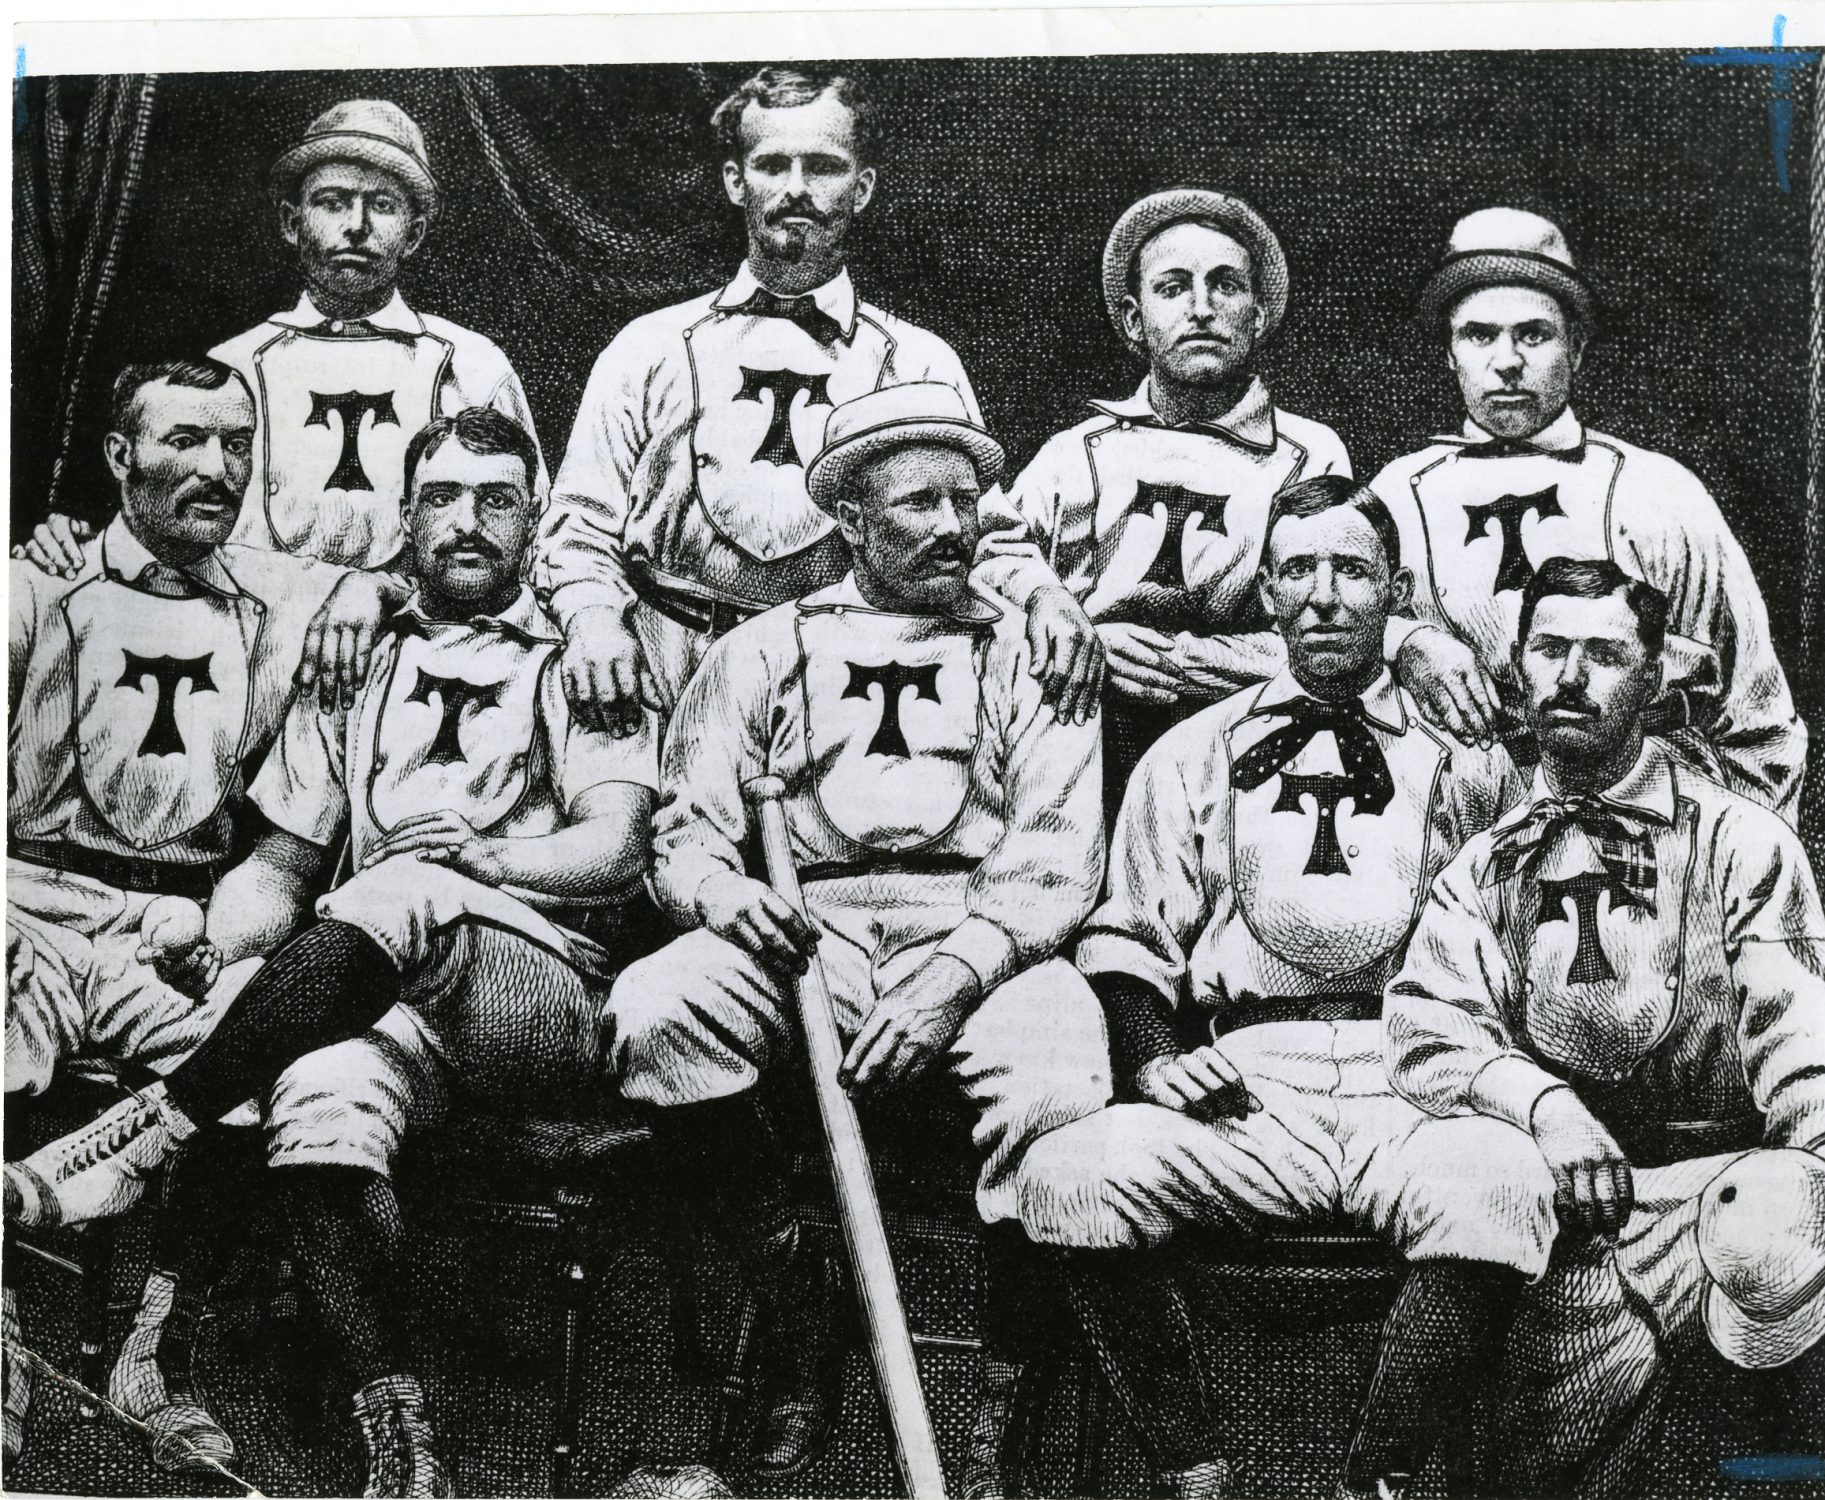 historic photo of mens baseball time posed in black and white